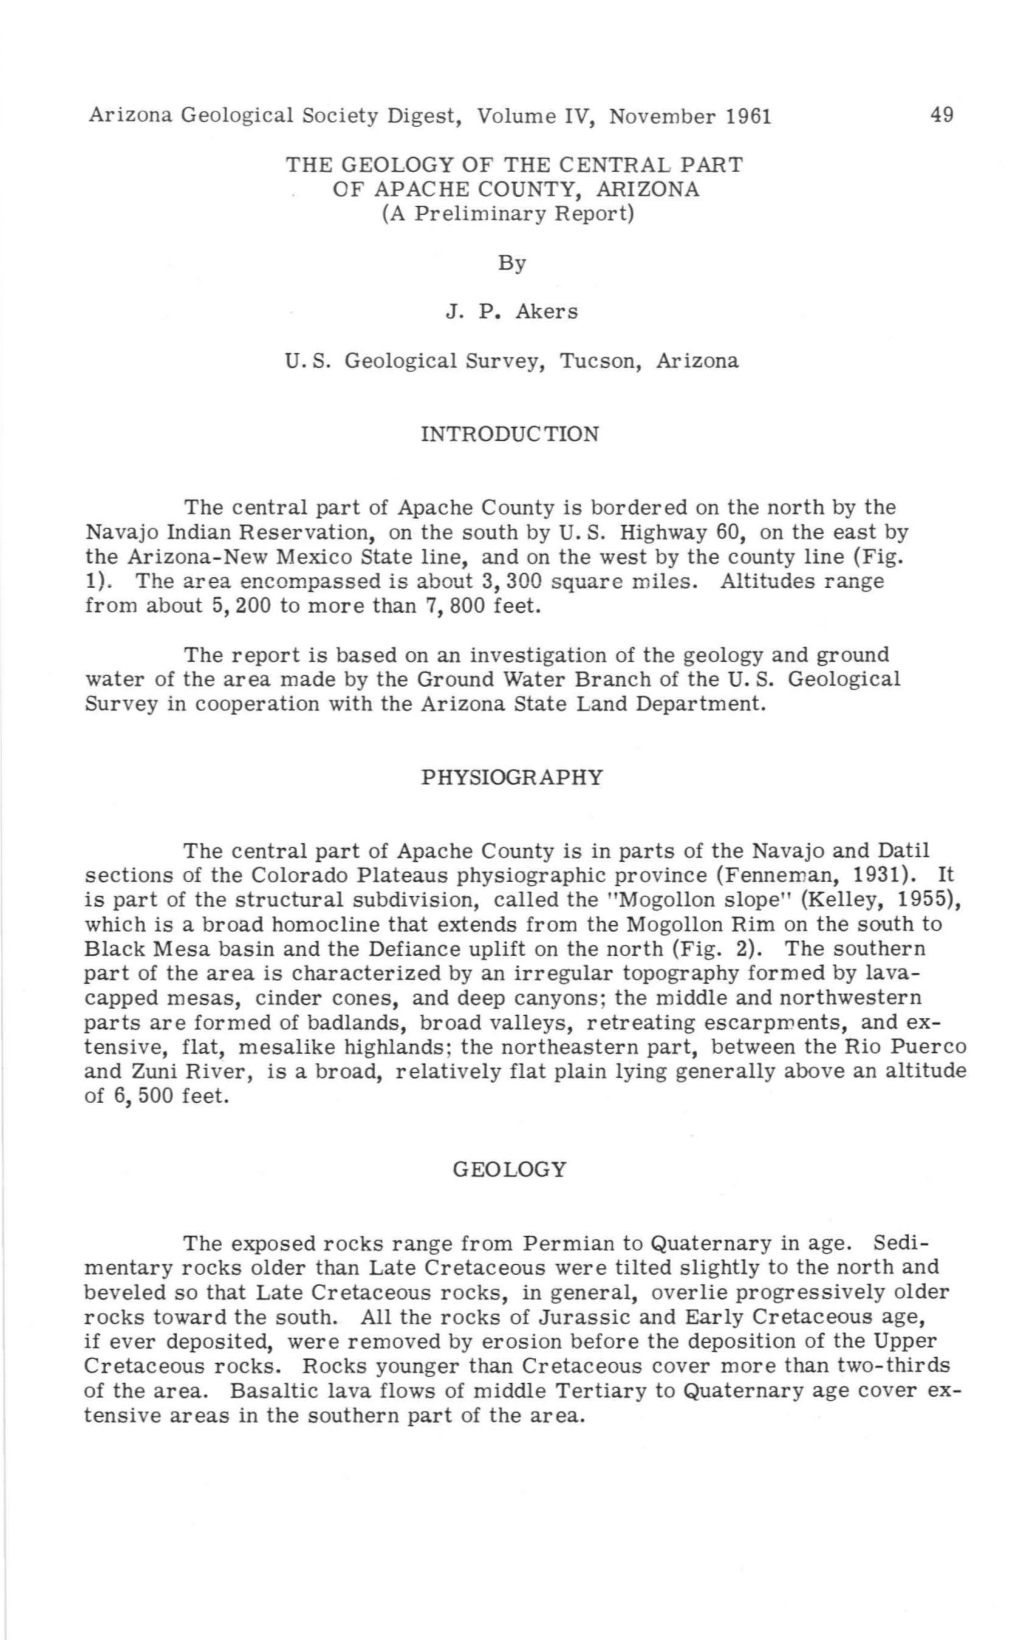 Arizona Geological Society Digest, Volume IV, November 1961 the GEOLOGY of the CENTRAL PART of APACHE COUNTY, ARIZONA (A Prelimi